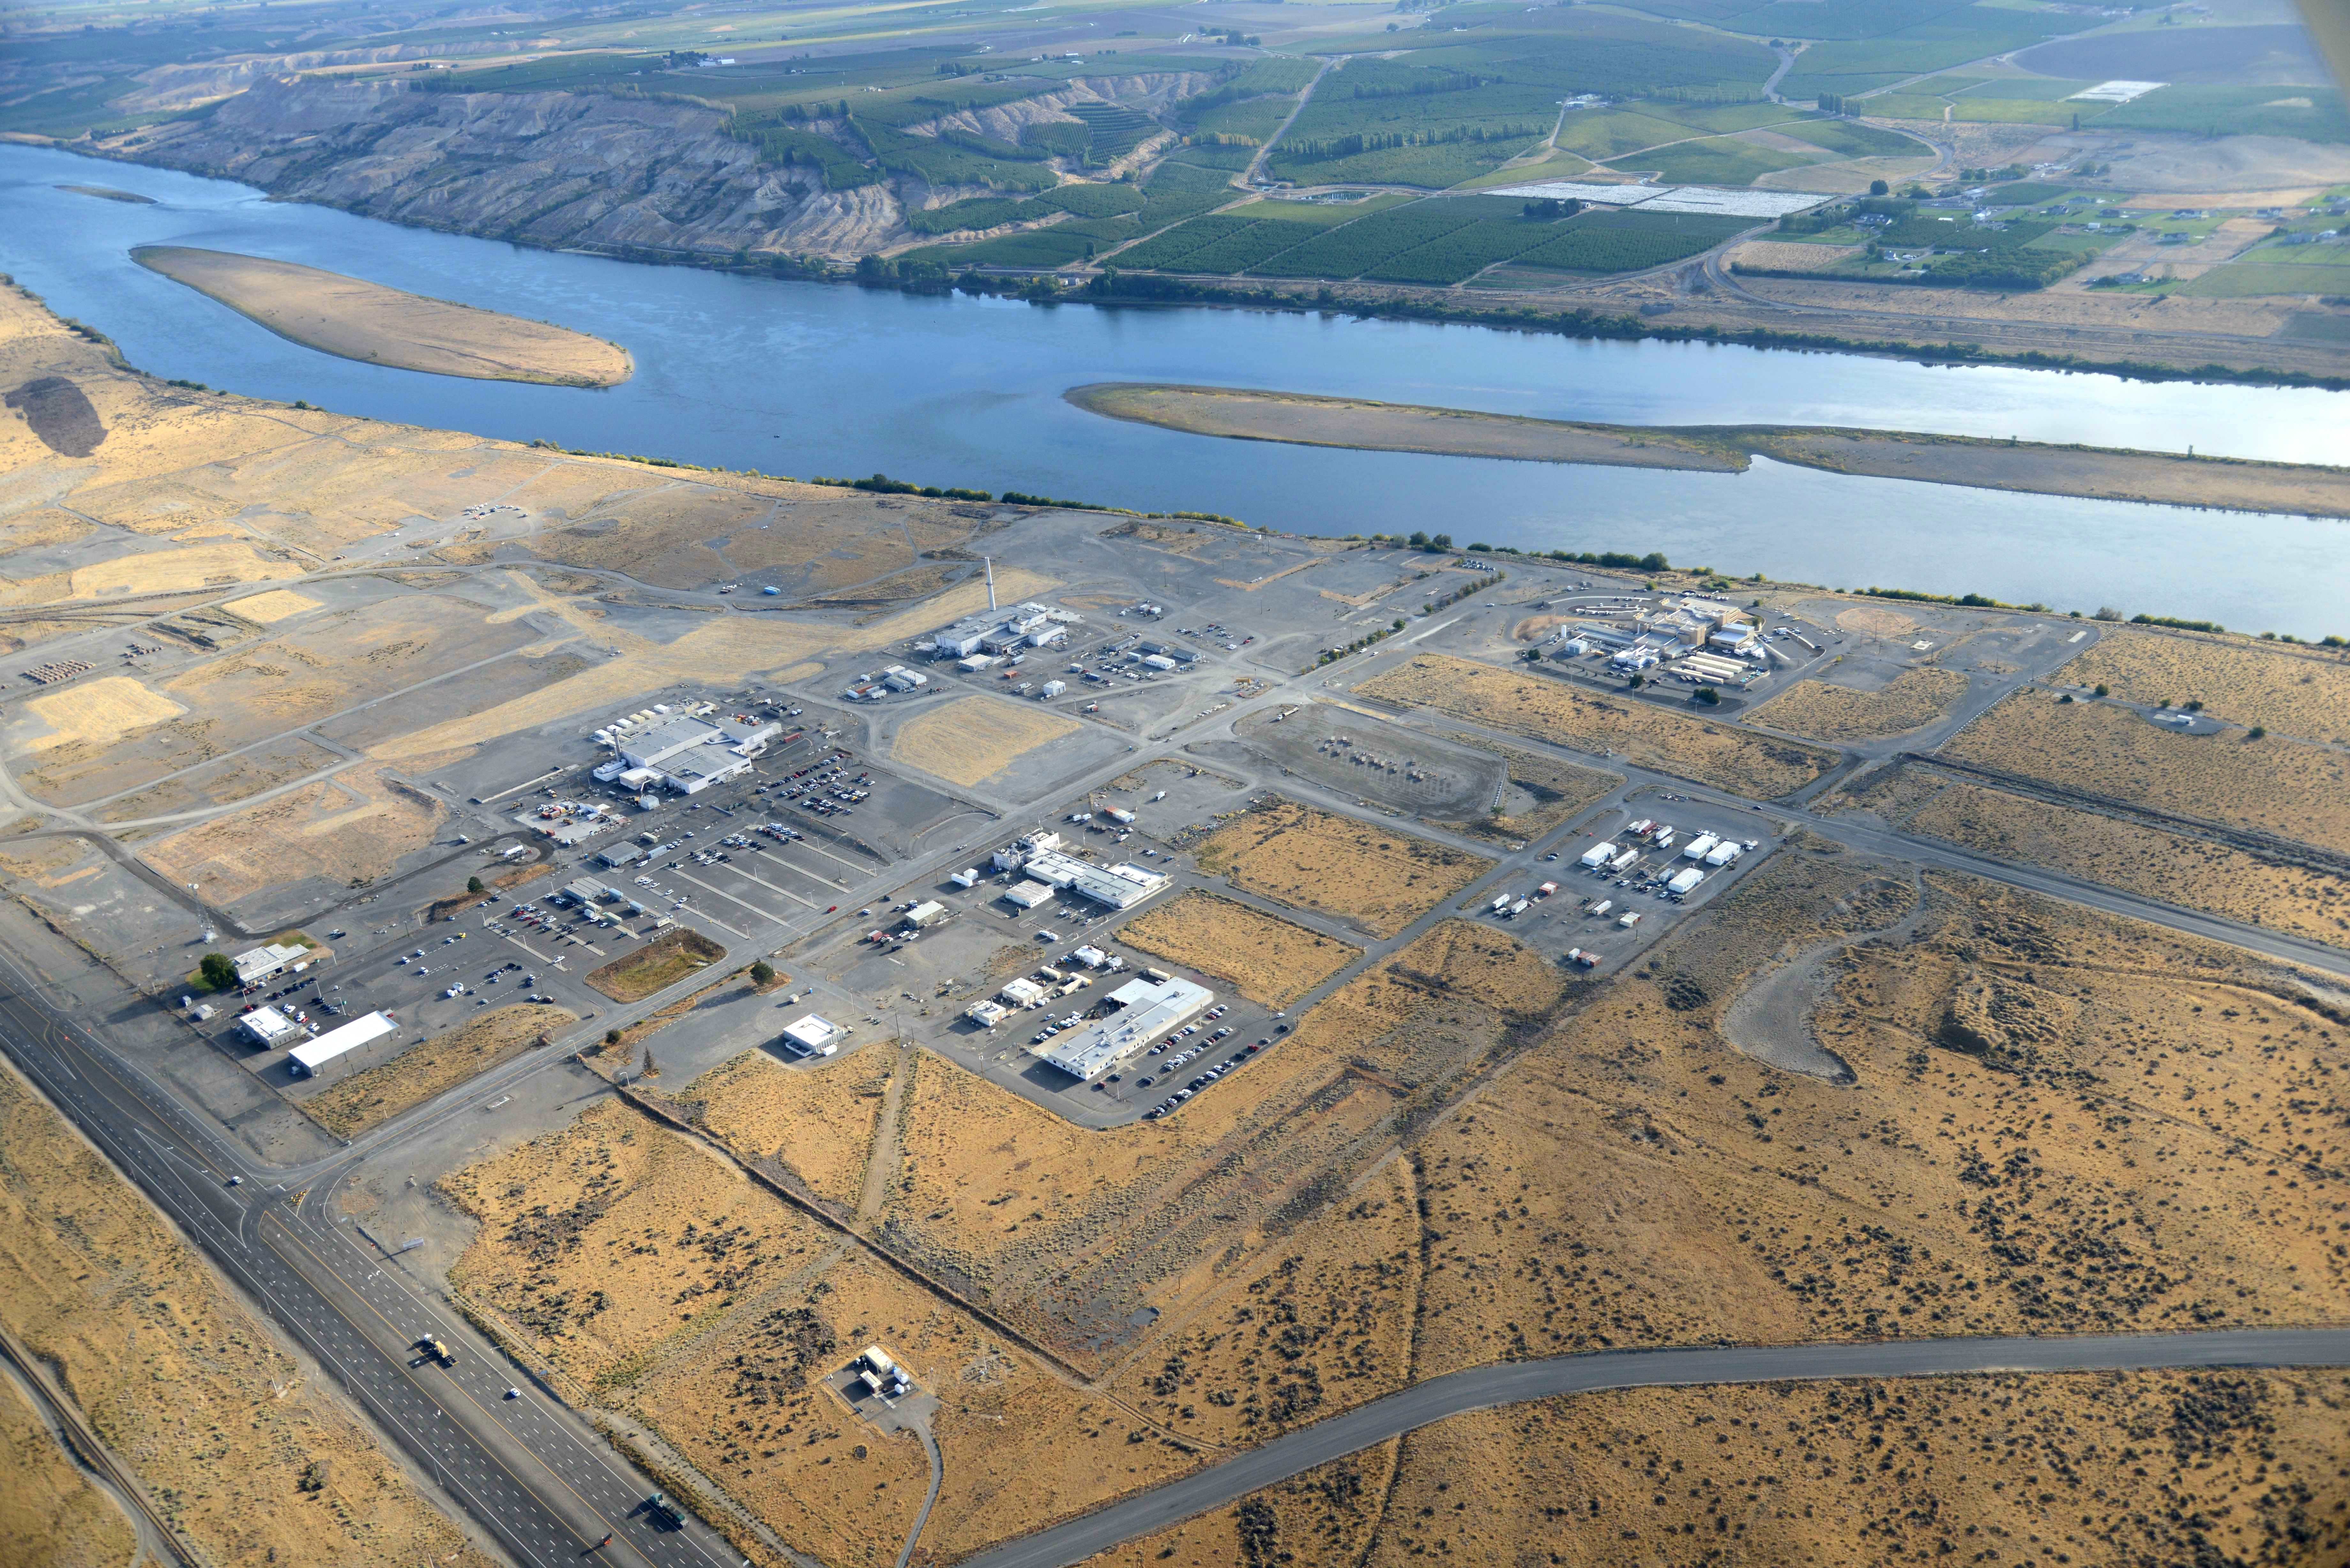 Aerial view of Hanford's 300 Area, showing a variety of buildings spread out over a large swath of land near the Columbia River